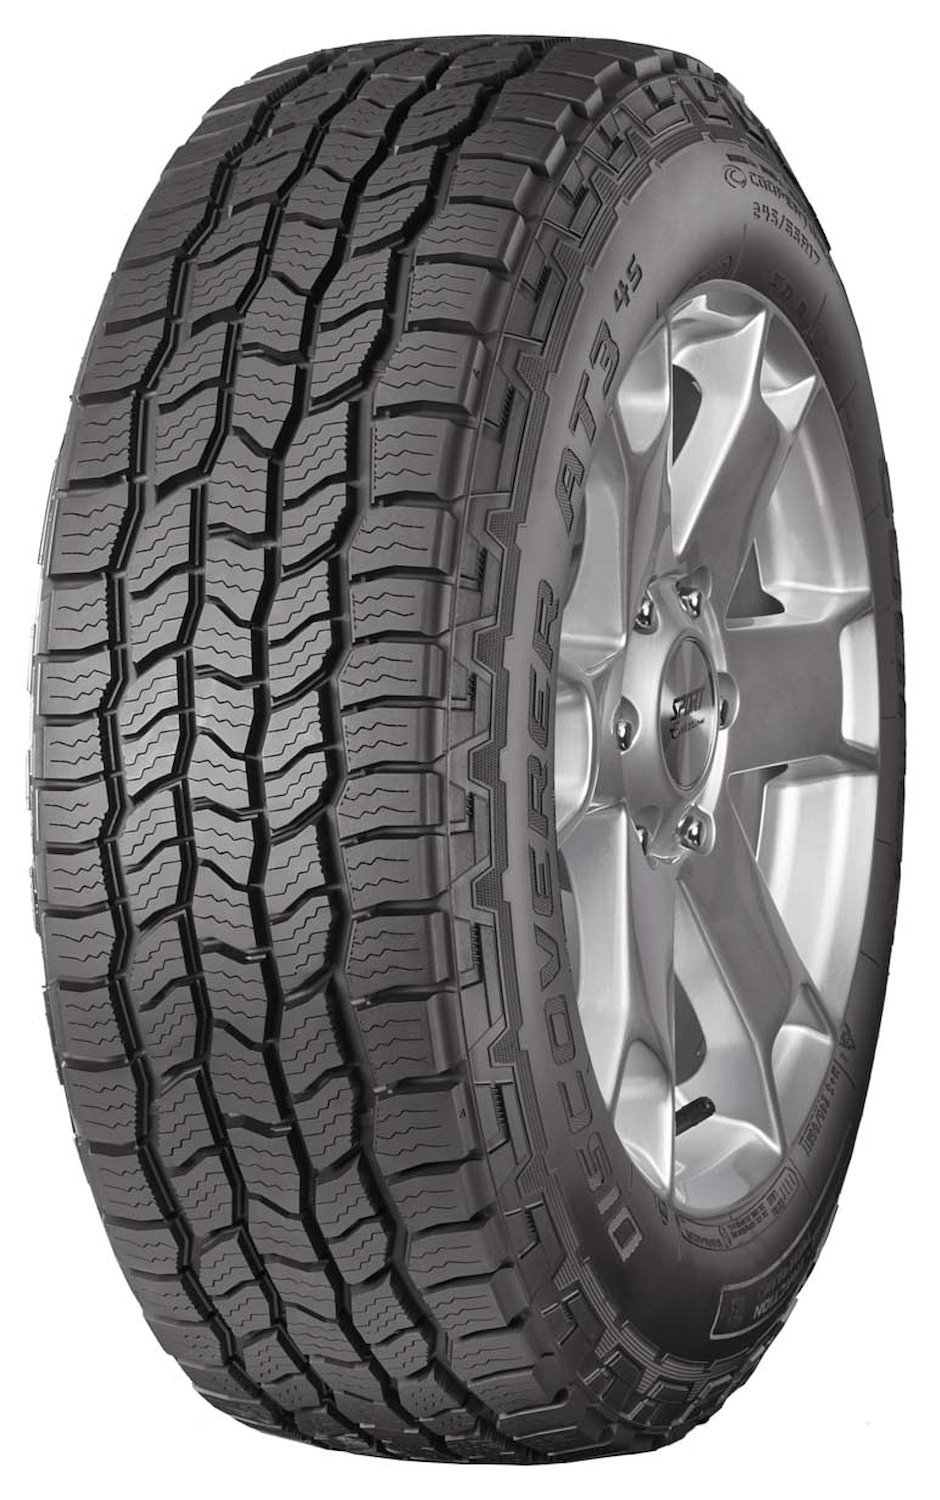 Discoverer AT3 4S All-Terrain Tire, 275/60R20